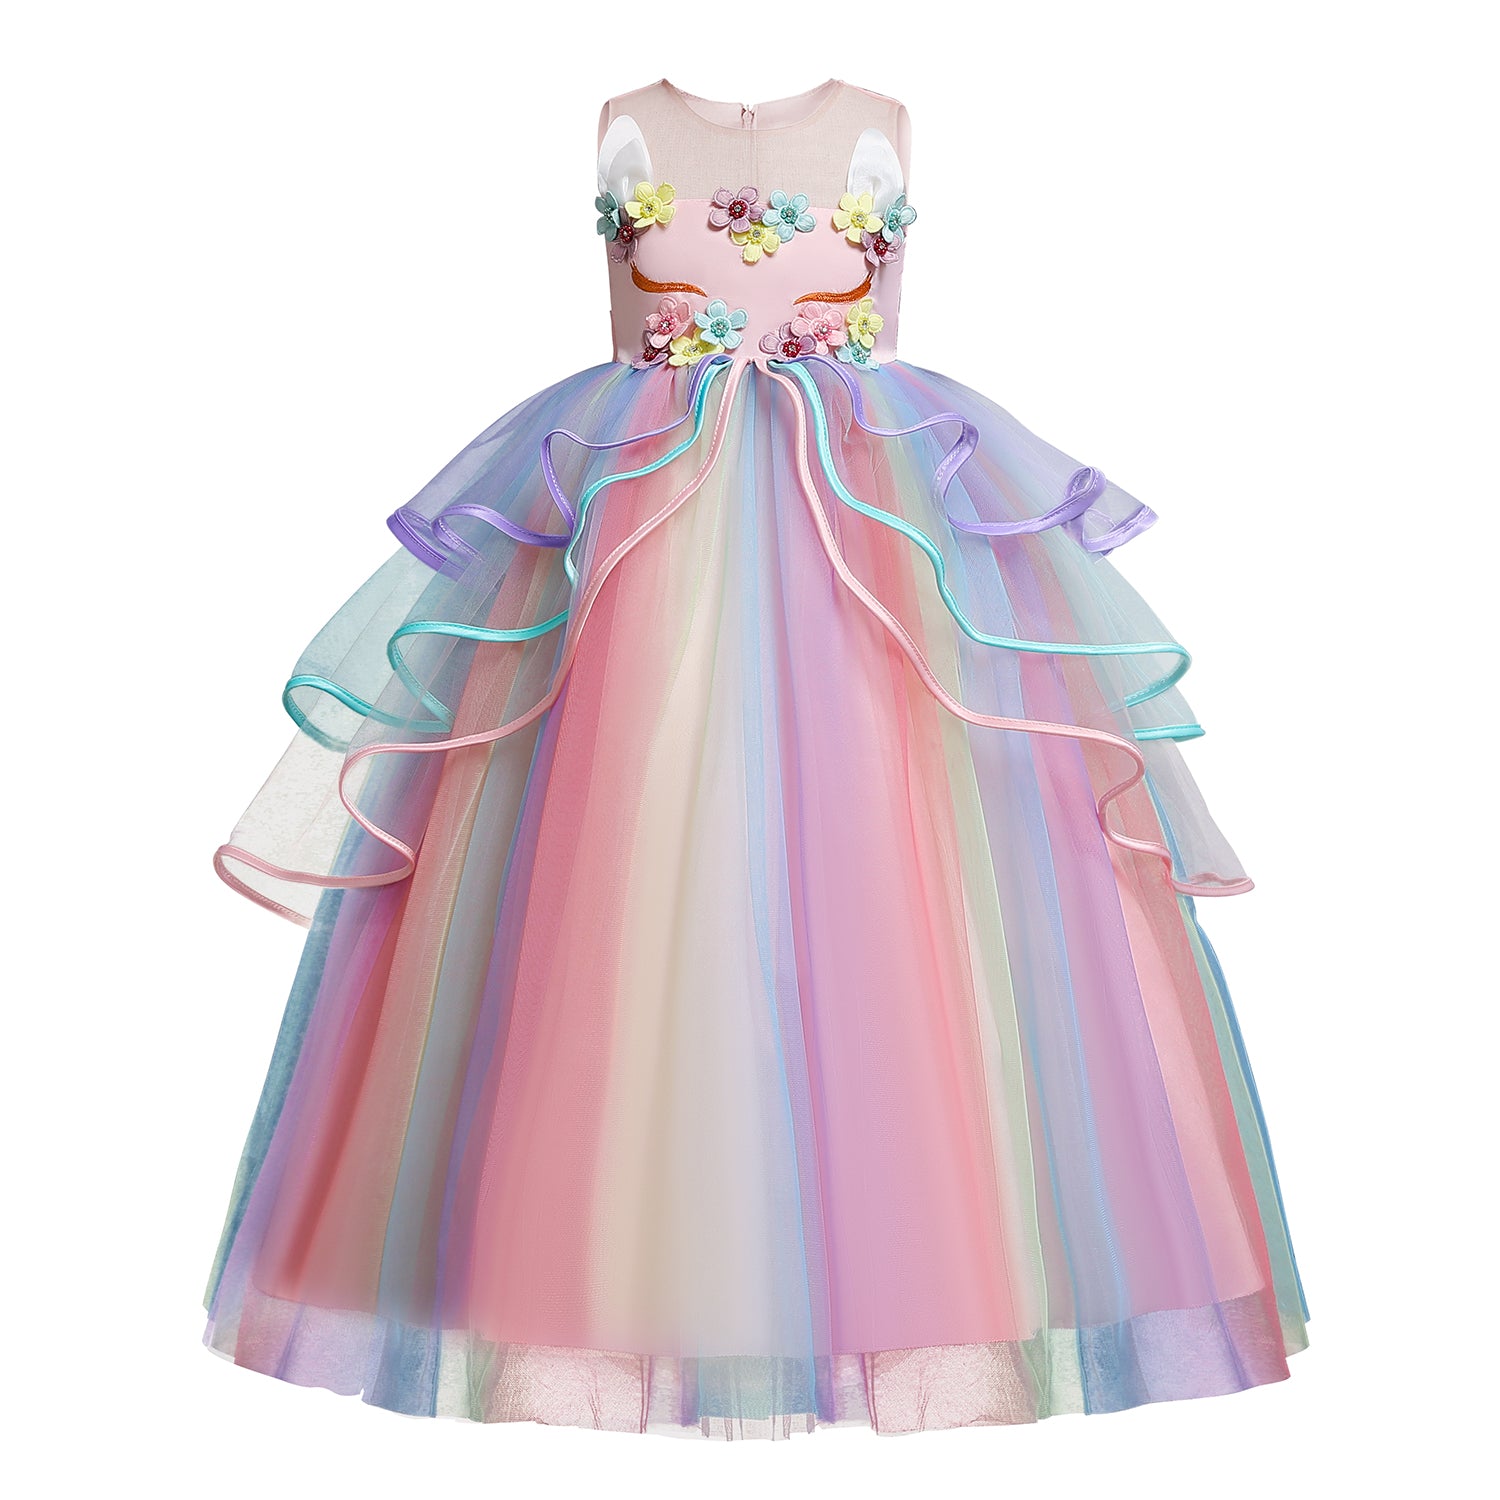 New Unicorn Girls Costume Cosplay Fancy Ball Gown Princess Tulle Dresses For Holiday Party Dance.